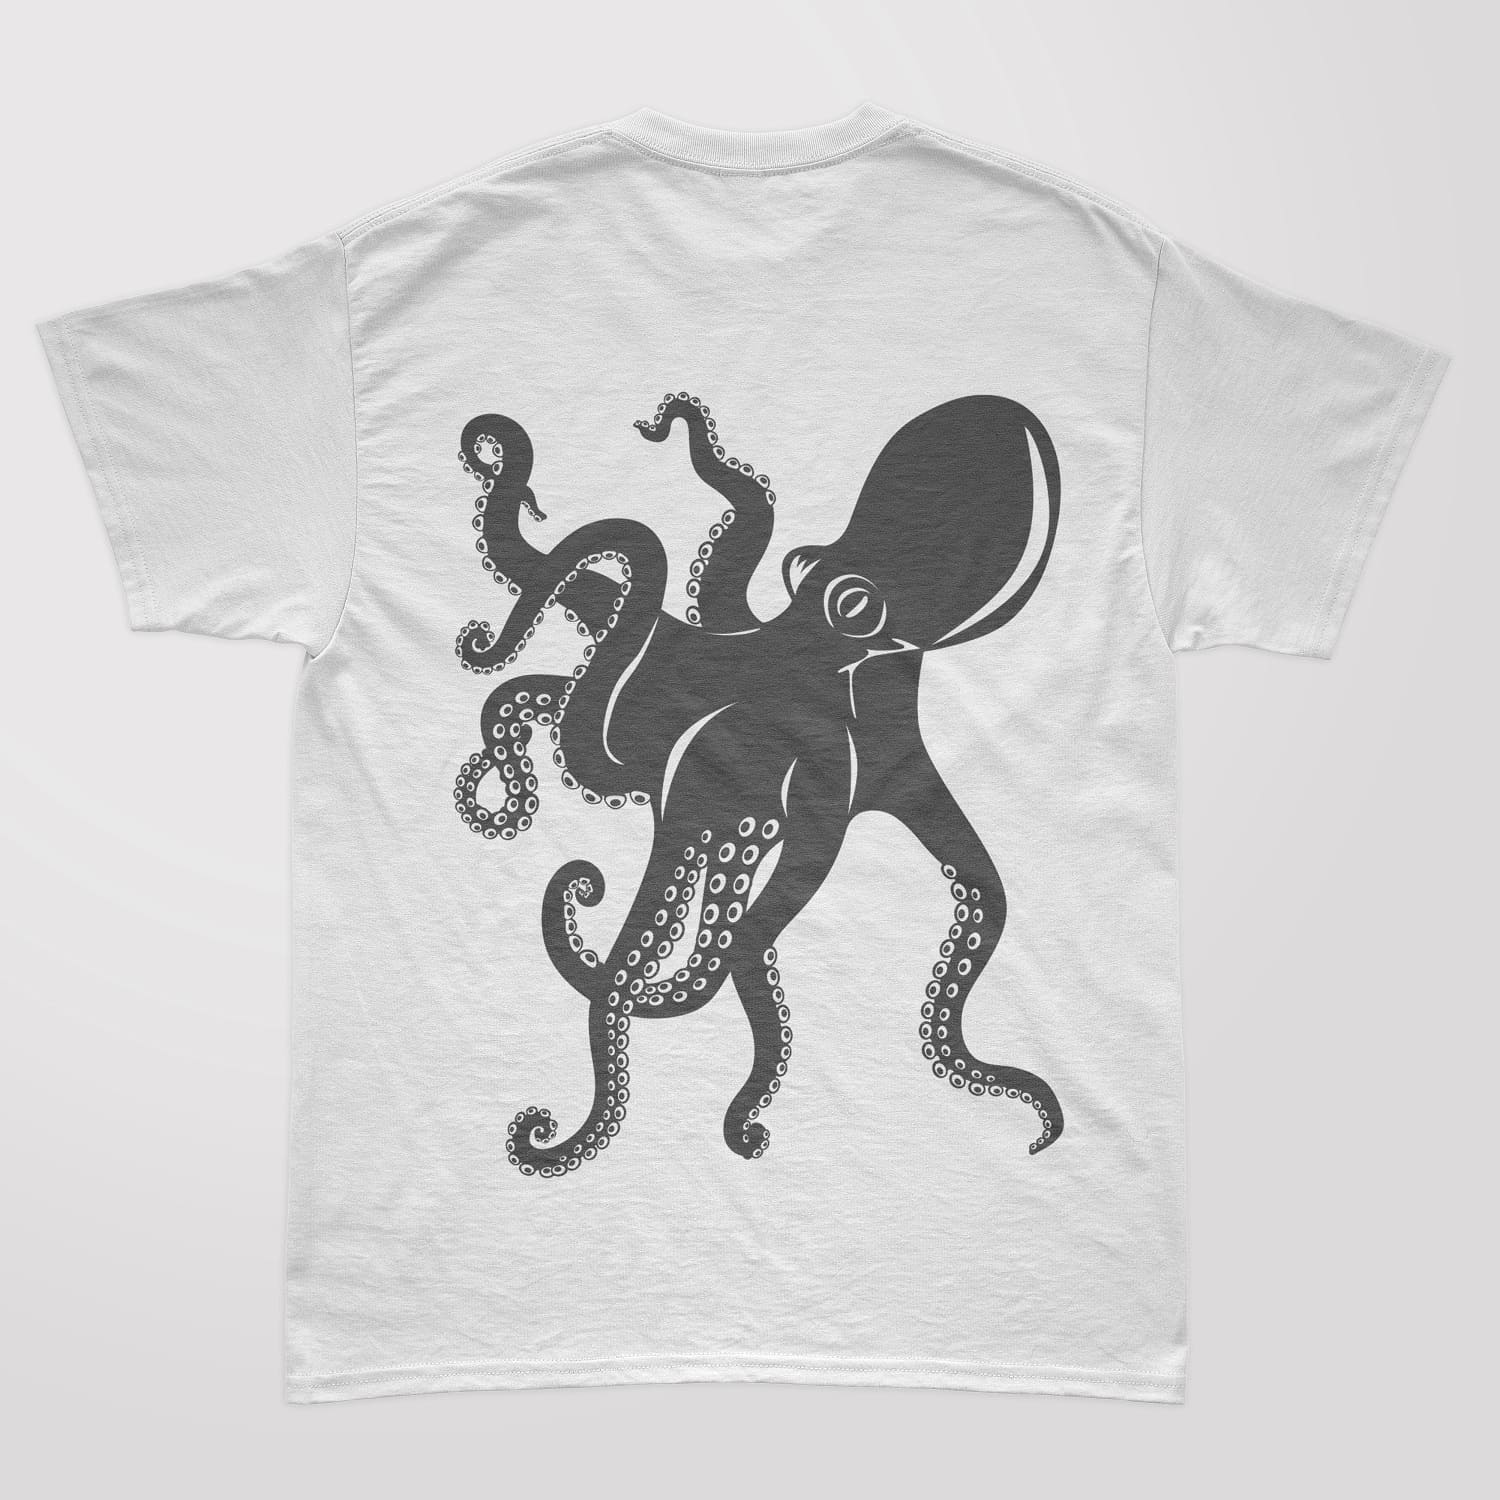 White T-shirt with a gray print of the silhouette of a large octopus.